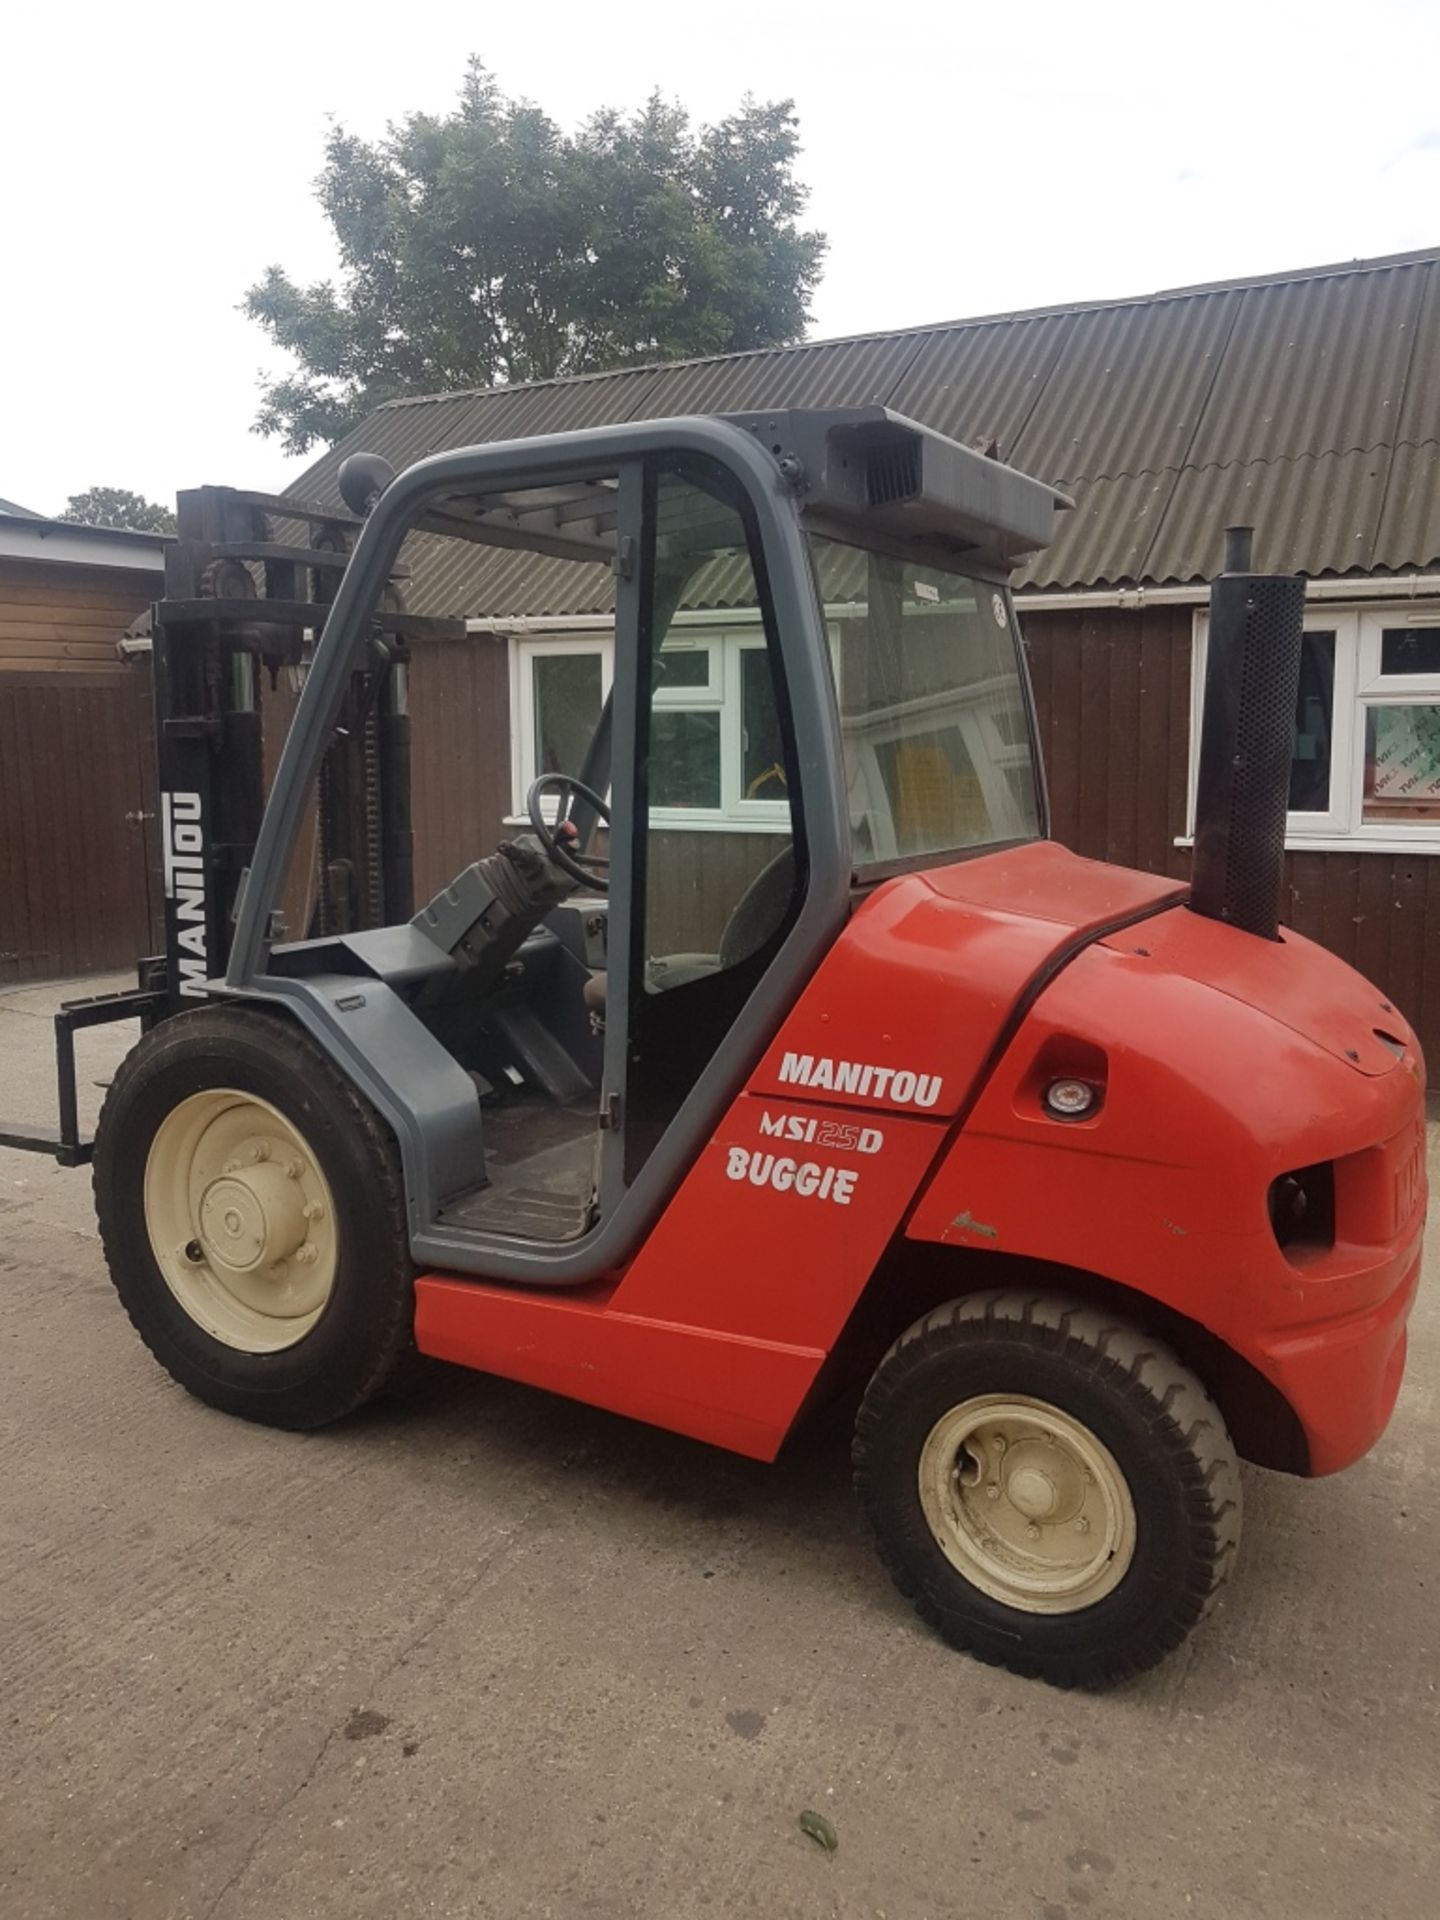 Manitou msi25d 2500 kgs diesel container spec forklift truck - Image 2 of 4